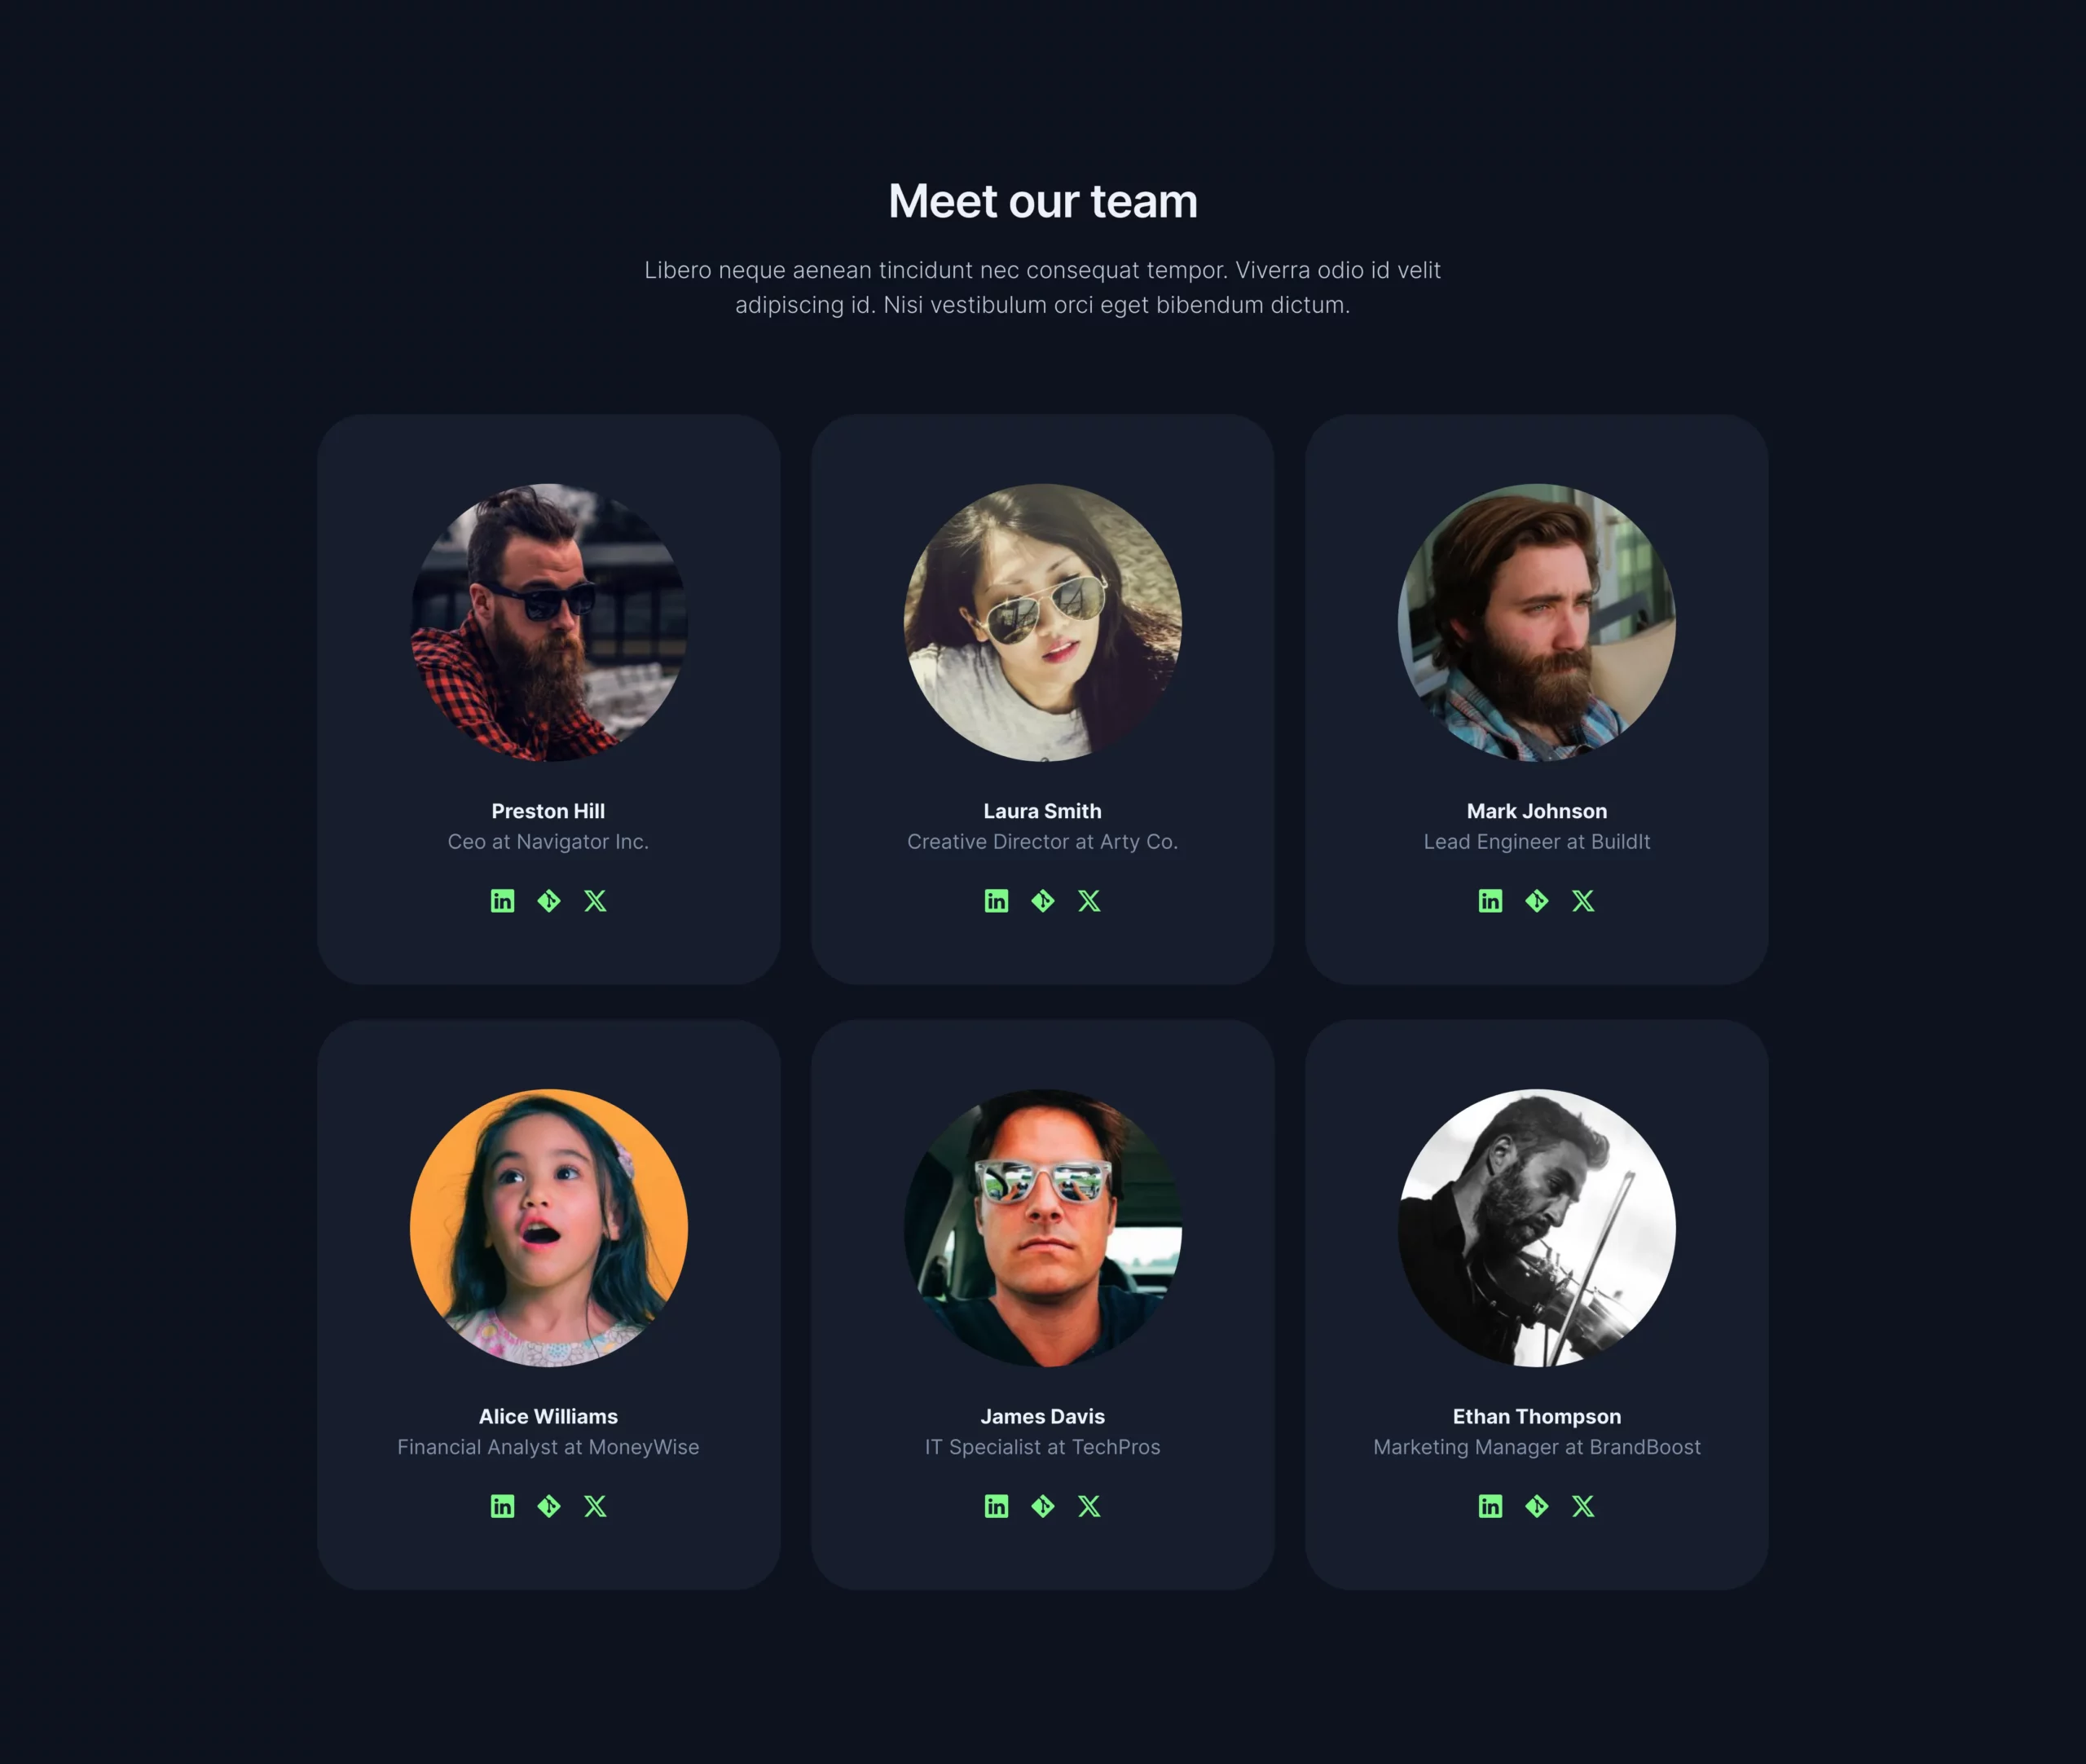 Dark version with large images Bootstrap 5 components